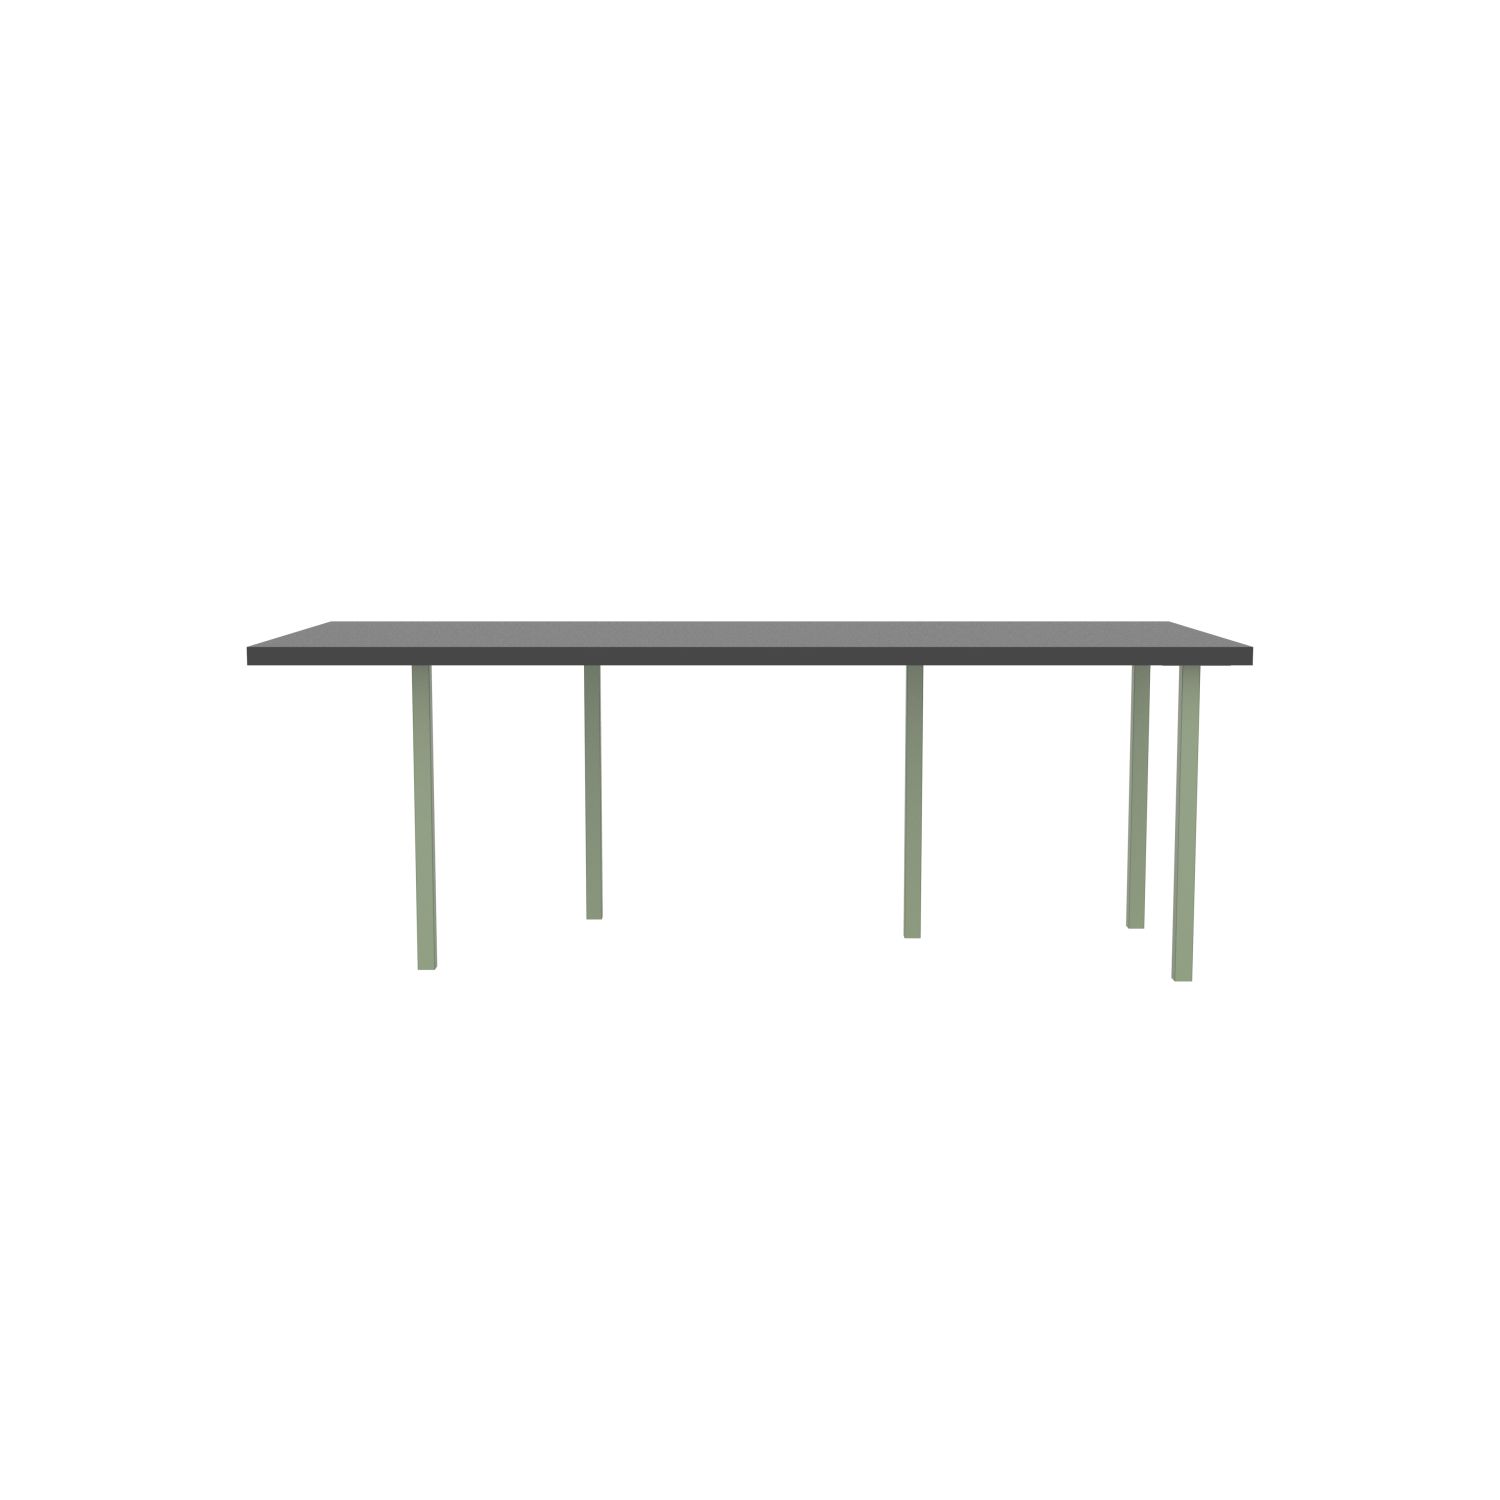 lensvelt bbrand table five fixed heigt 915x218 hpl black 50 mm price level 1 green ral6021